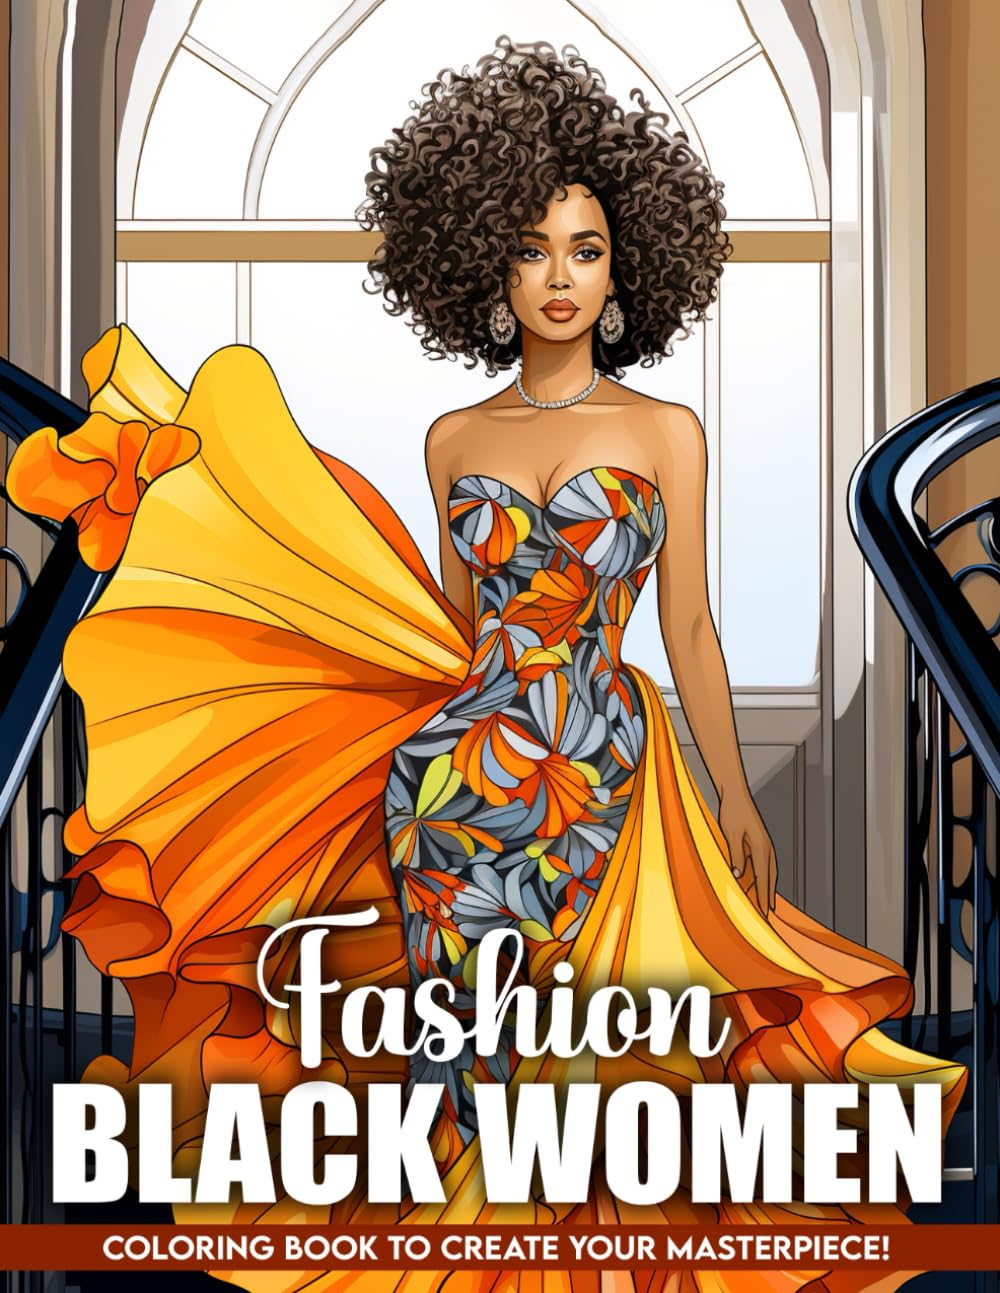 Fashion Black Women Coloring Book: Embrace the Style and Grace of Fashionable Black Women, Great for Fans of Fashion and Diverse Beauty